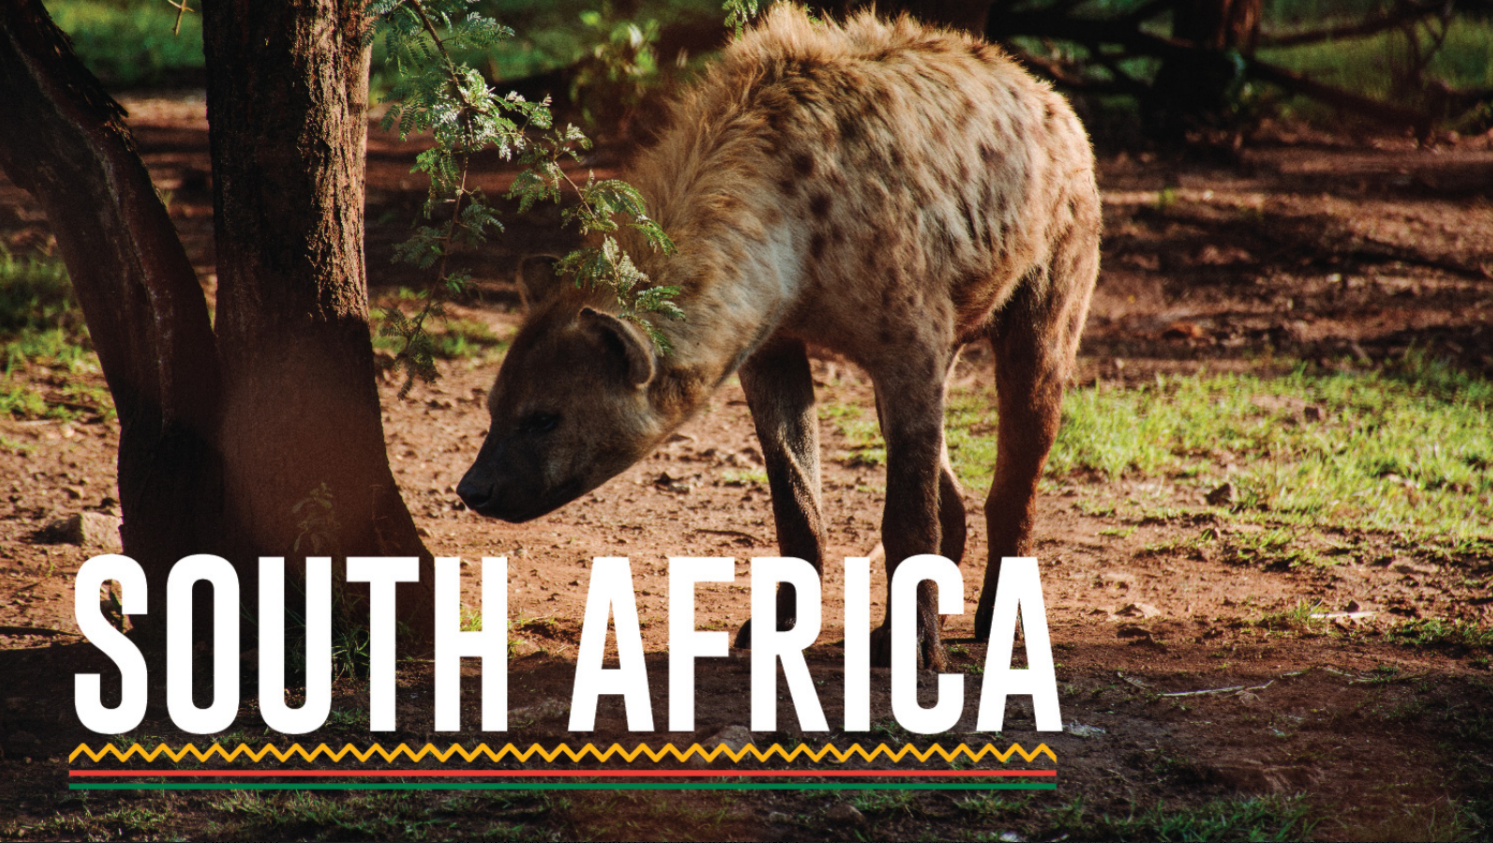 South Africa Luxury Safari Vacation package